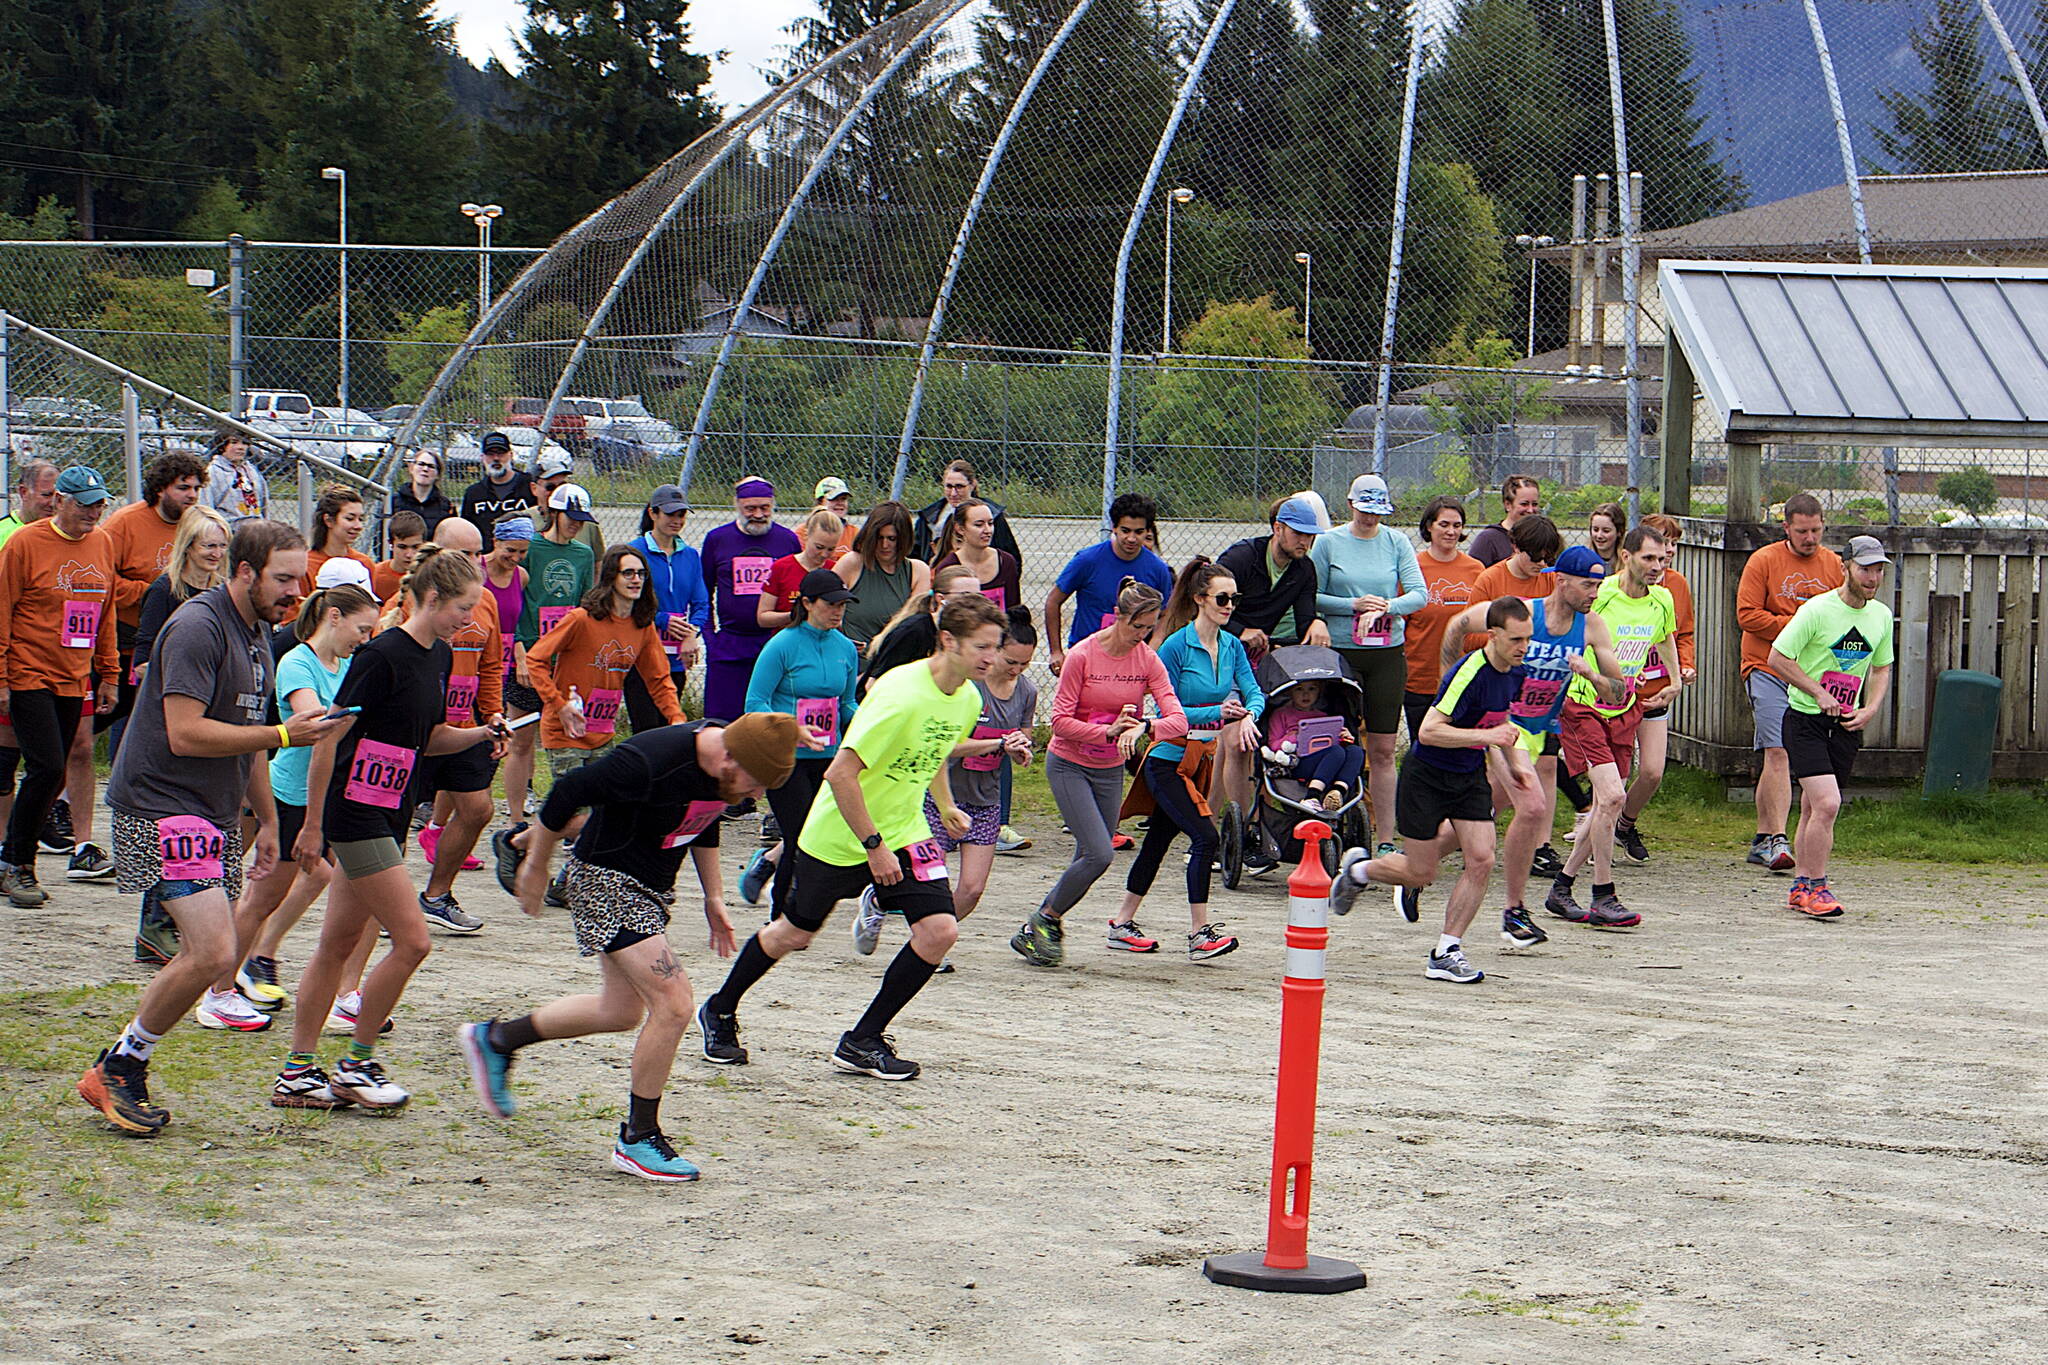 Dozens of runners start the 5K course during the 32nd Annual Beat the Odds: A Race Against Cancer that started and ended at Kax̱dig̱oowu Héen Elementary School on Saturday morning. A total of 312 people signed up for the run and a separate two-mile walking event, with an event official estimating about 25% took part in the 5K. (Mark Sabbatini / Juneau Empire)